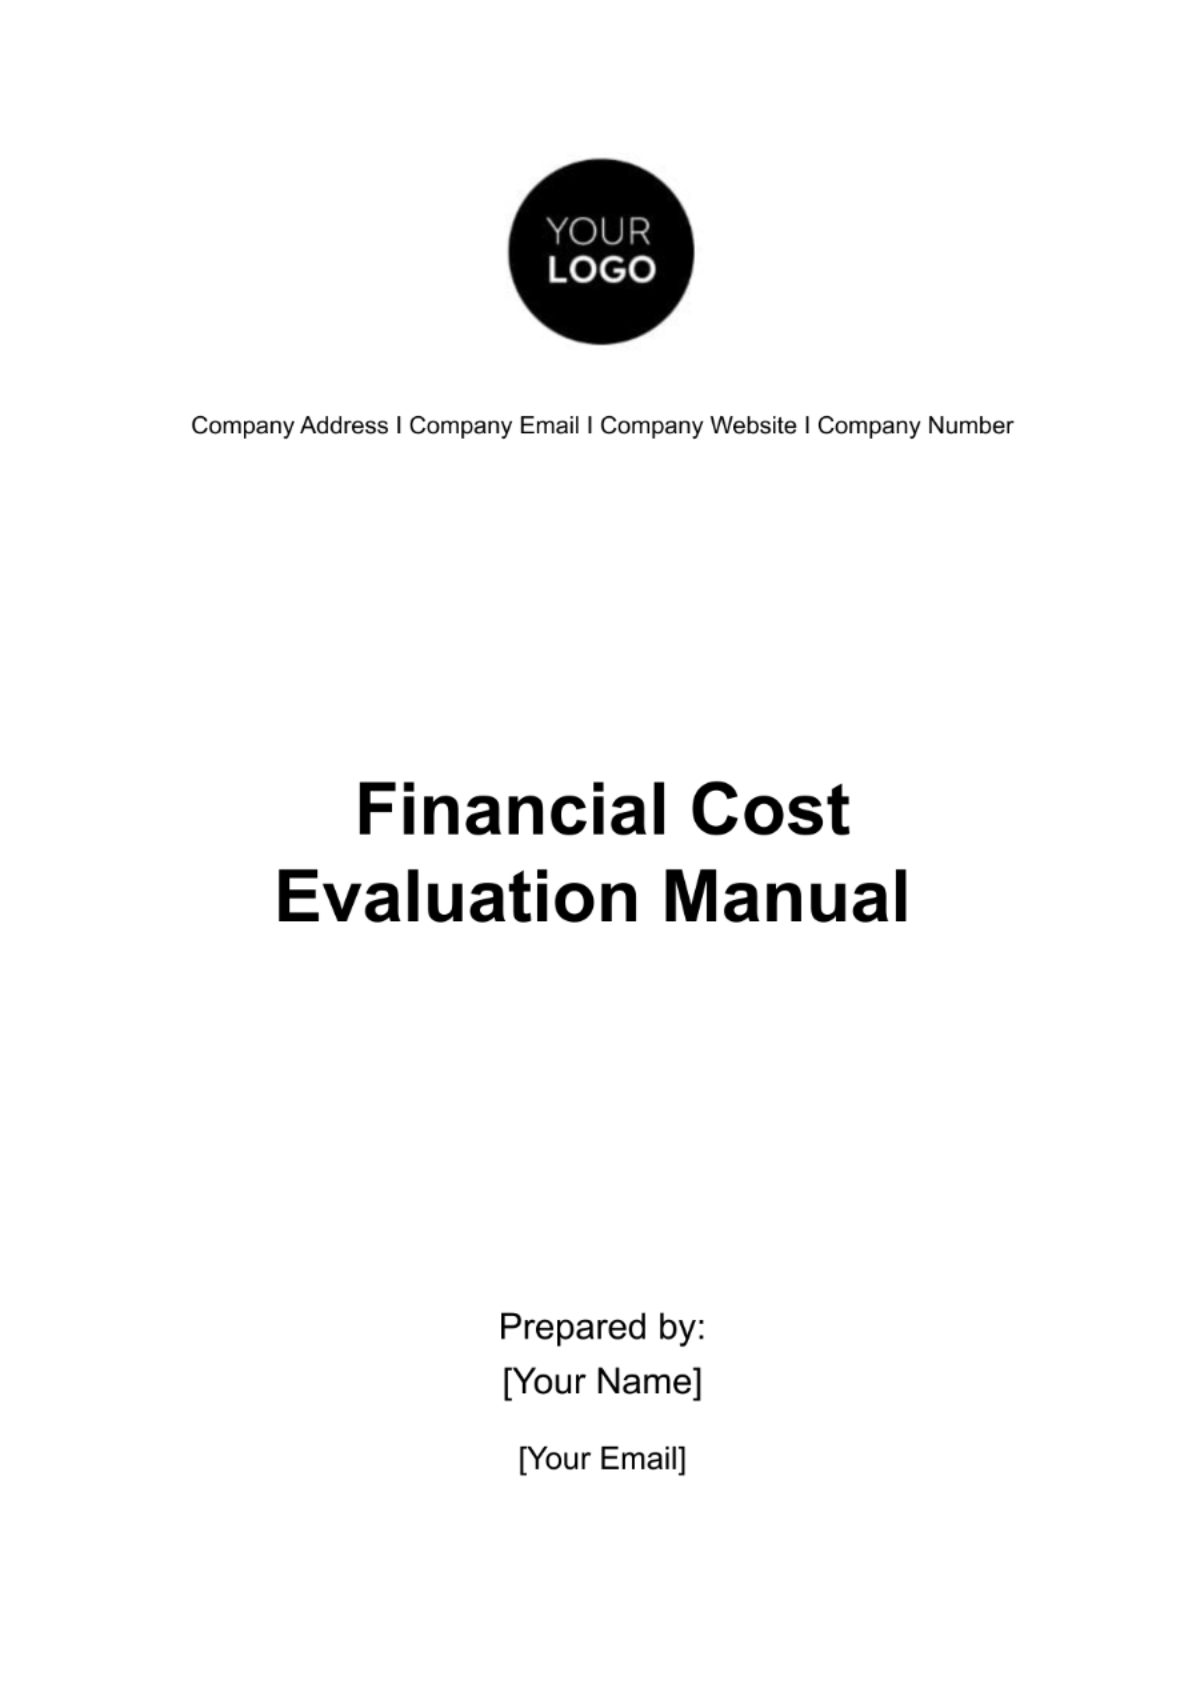 Financial Cost Evaluation Manual Template